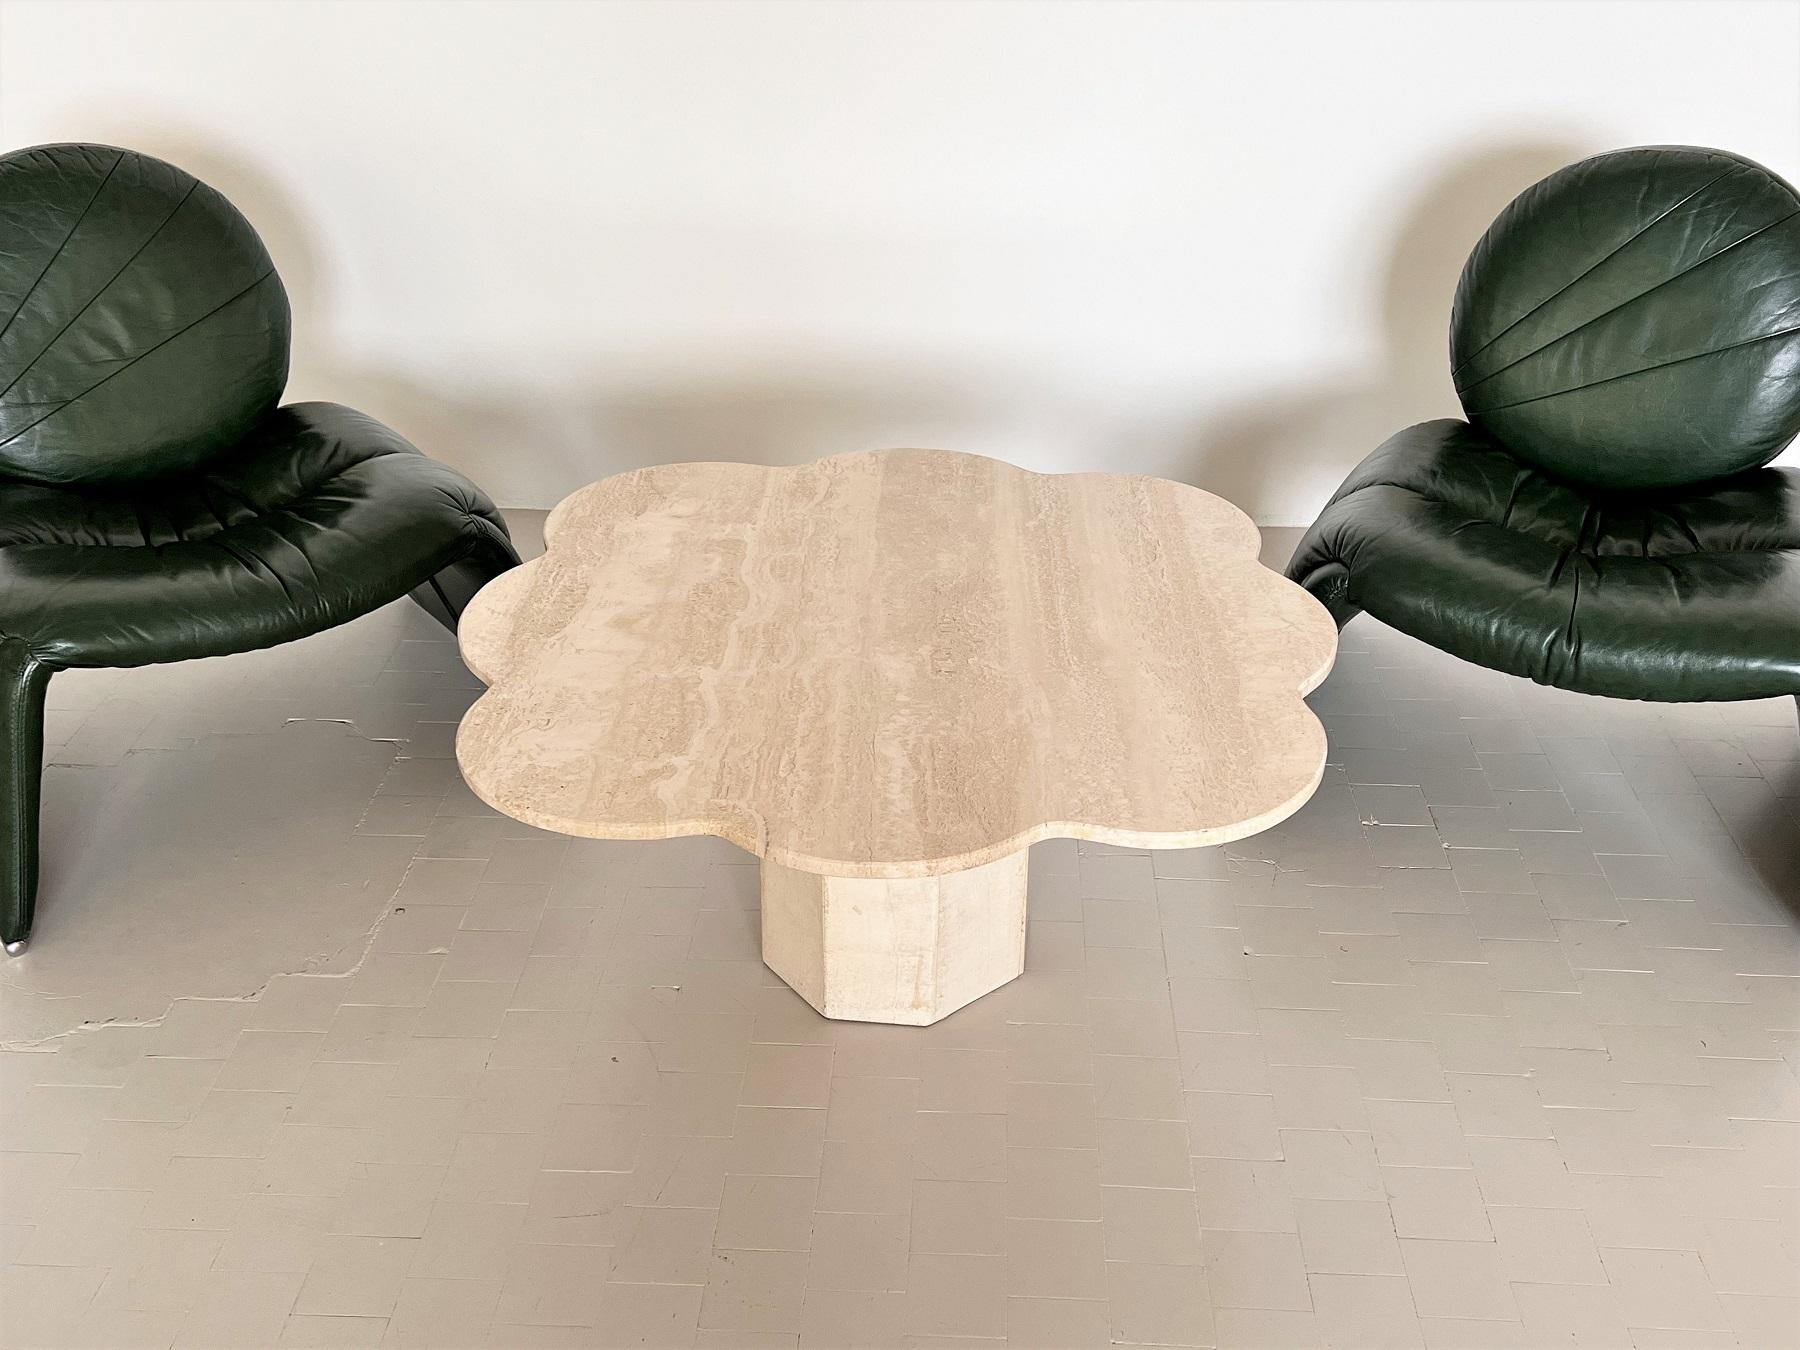 Sculptural sofa or coffee table handmade of travertine stone in Italy in the 1980s.
The beautiful table top is cut with soft rounded edge and has a shape of a big cloud.
The big table leg in octagonal shape (with eight sides) , also made of